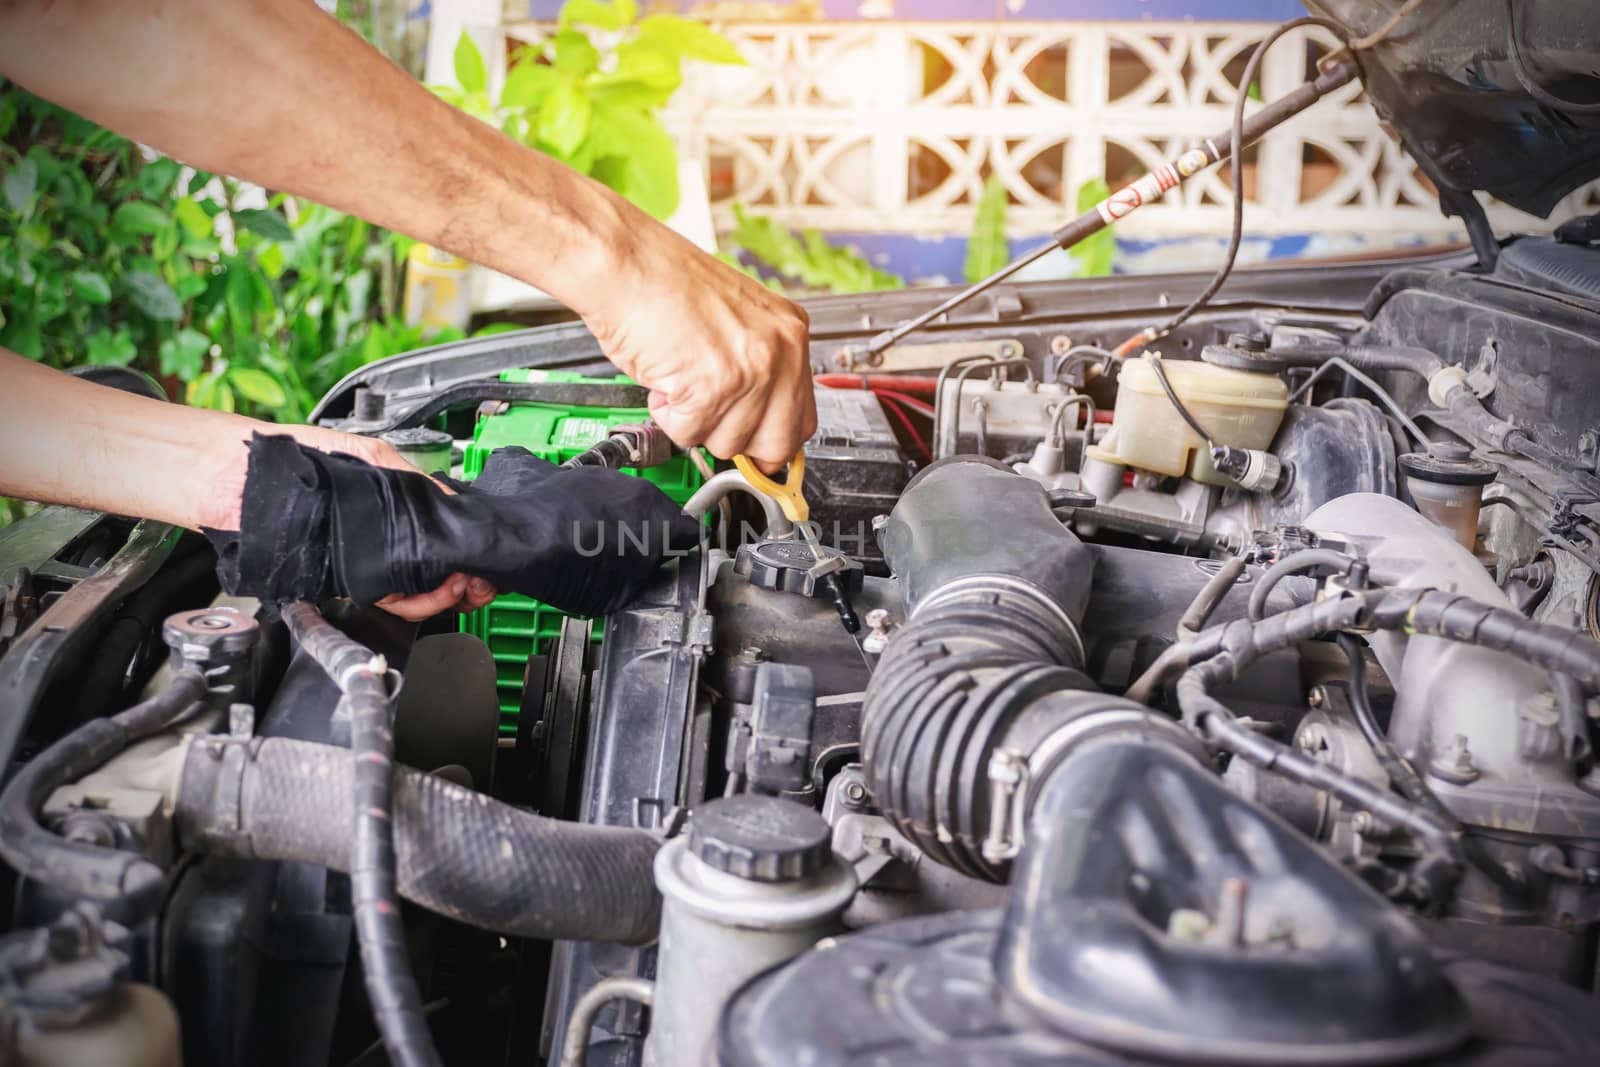 Cars mechanic is checking the level of engine oil from the engine oil level gauge of the car, Automotive industry and garage concepts.